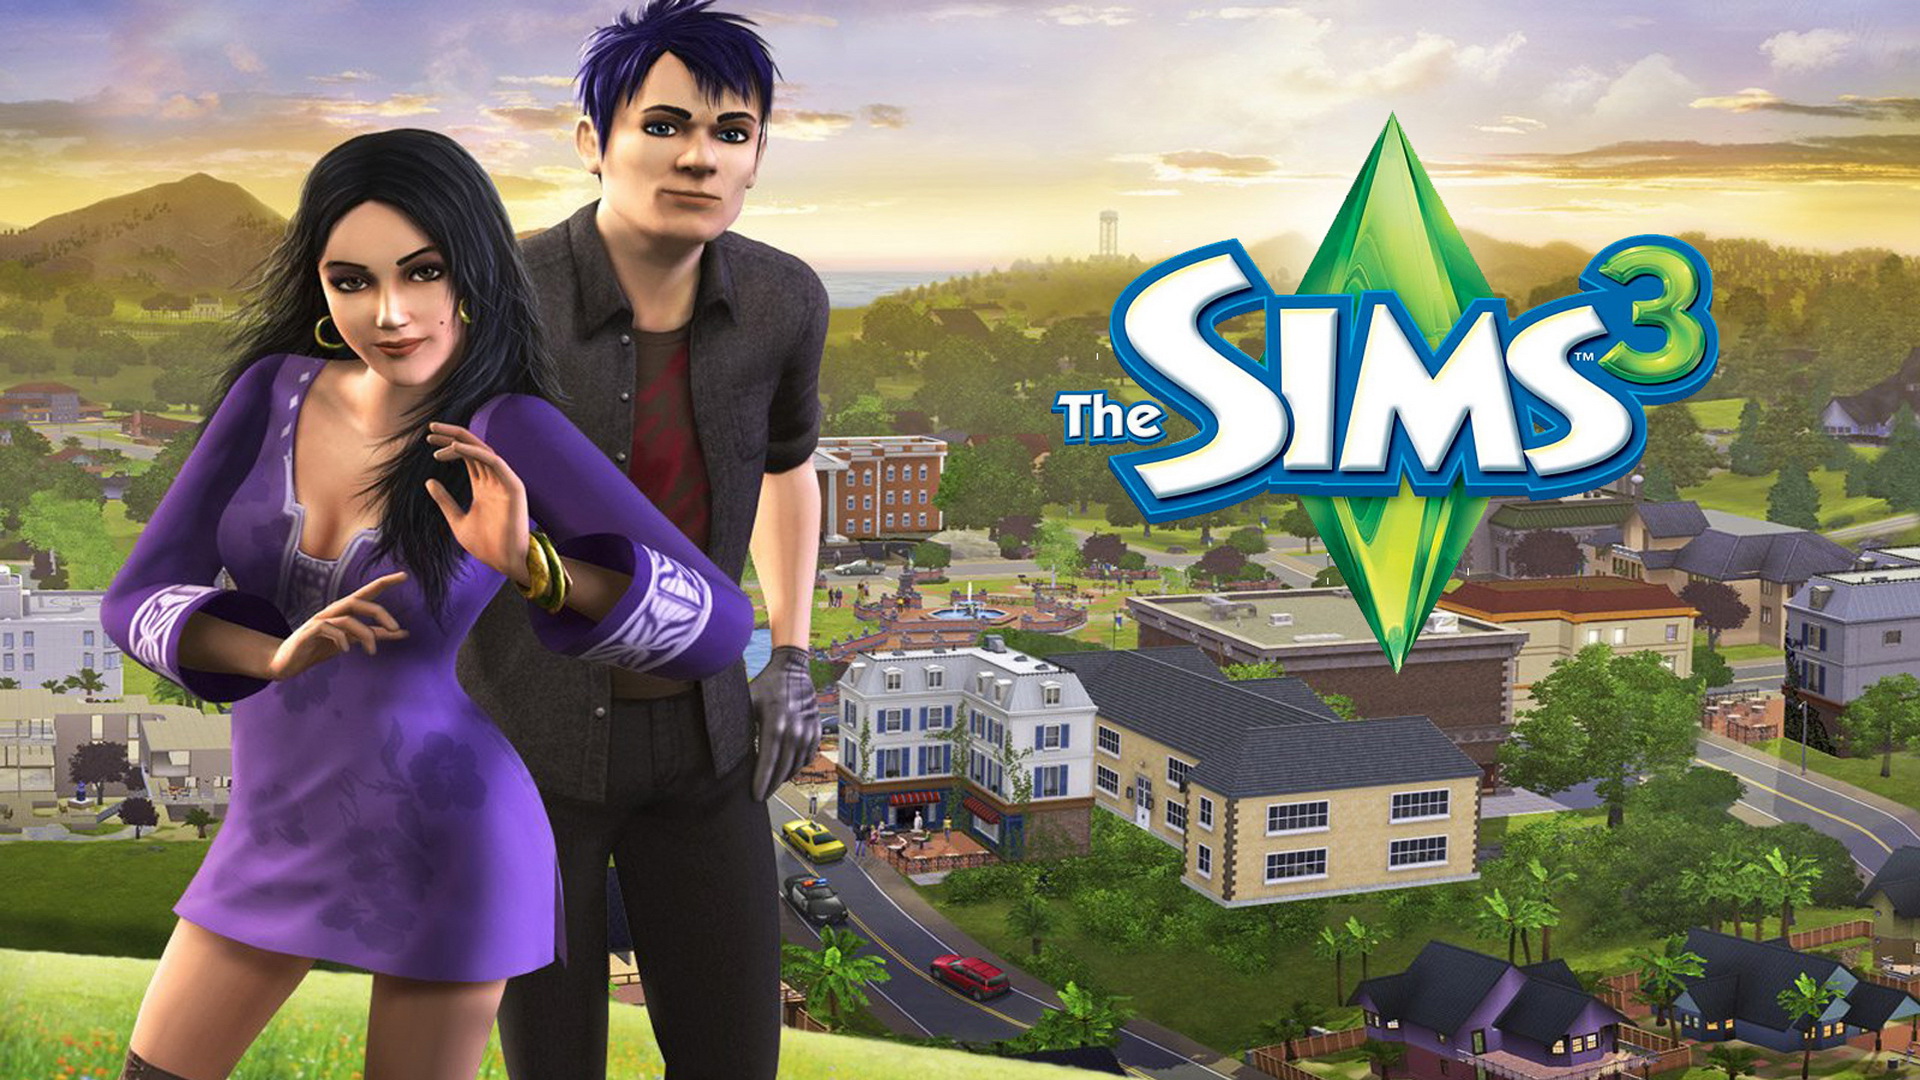 the sims 3 full version free